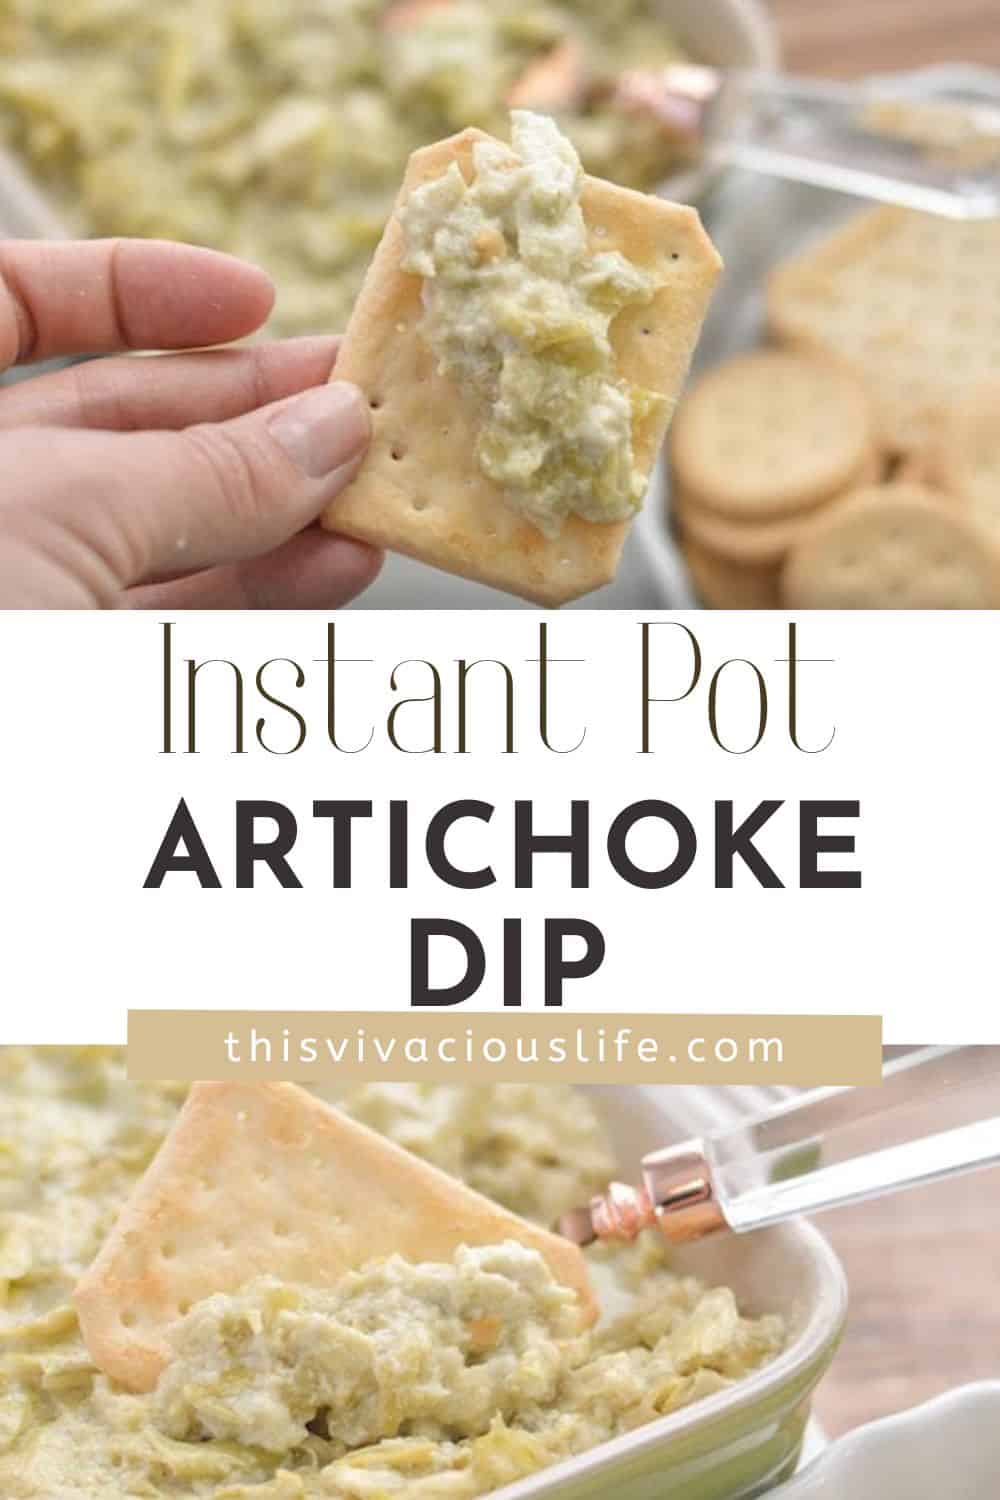 Instant Pot Artichoke Dip That Tastes Better Than Any Other